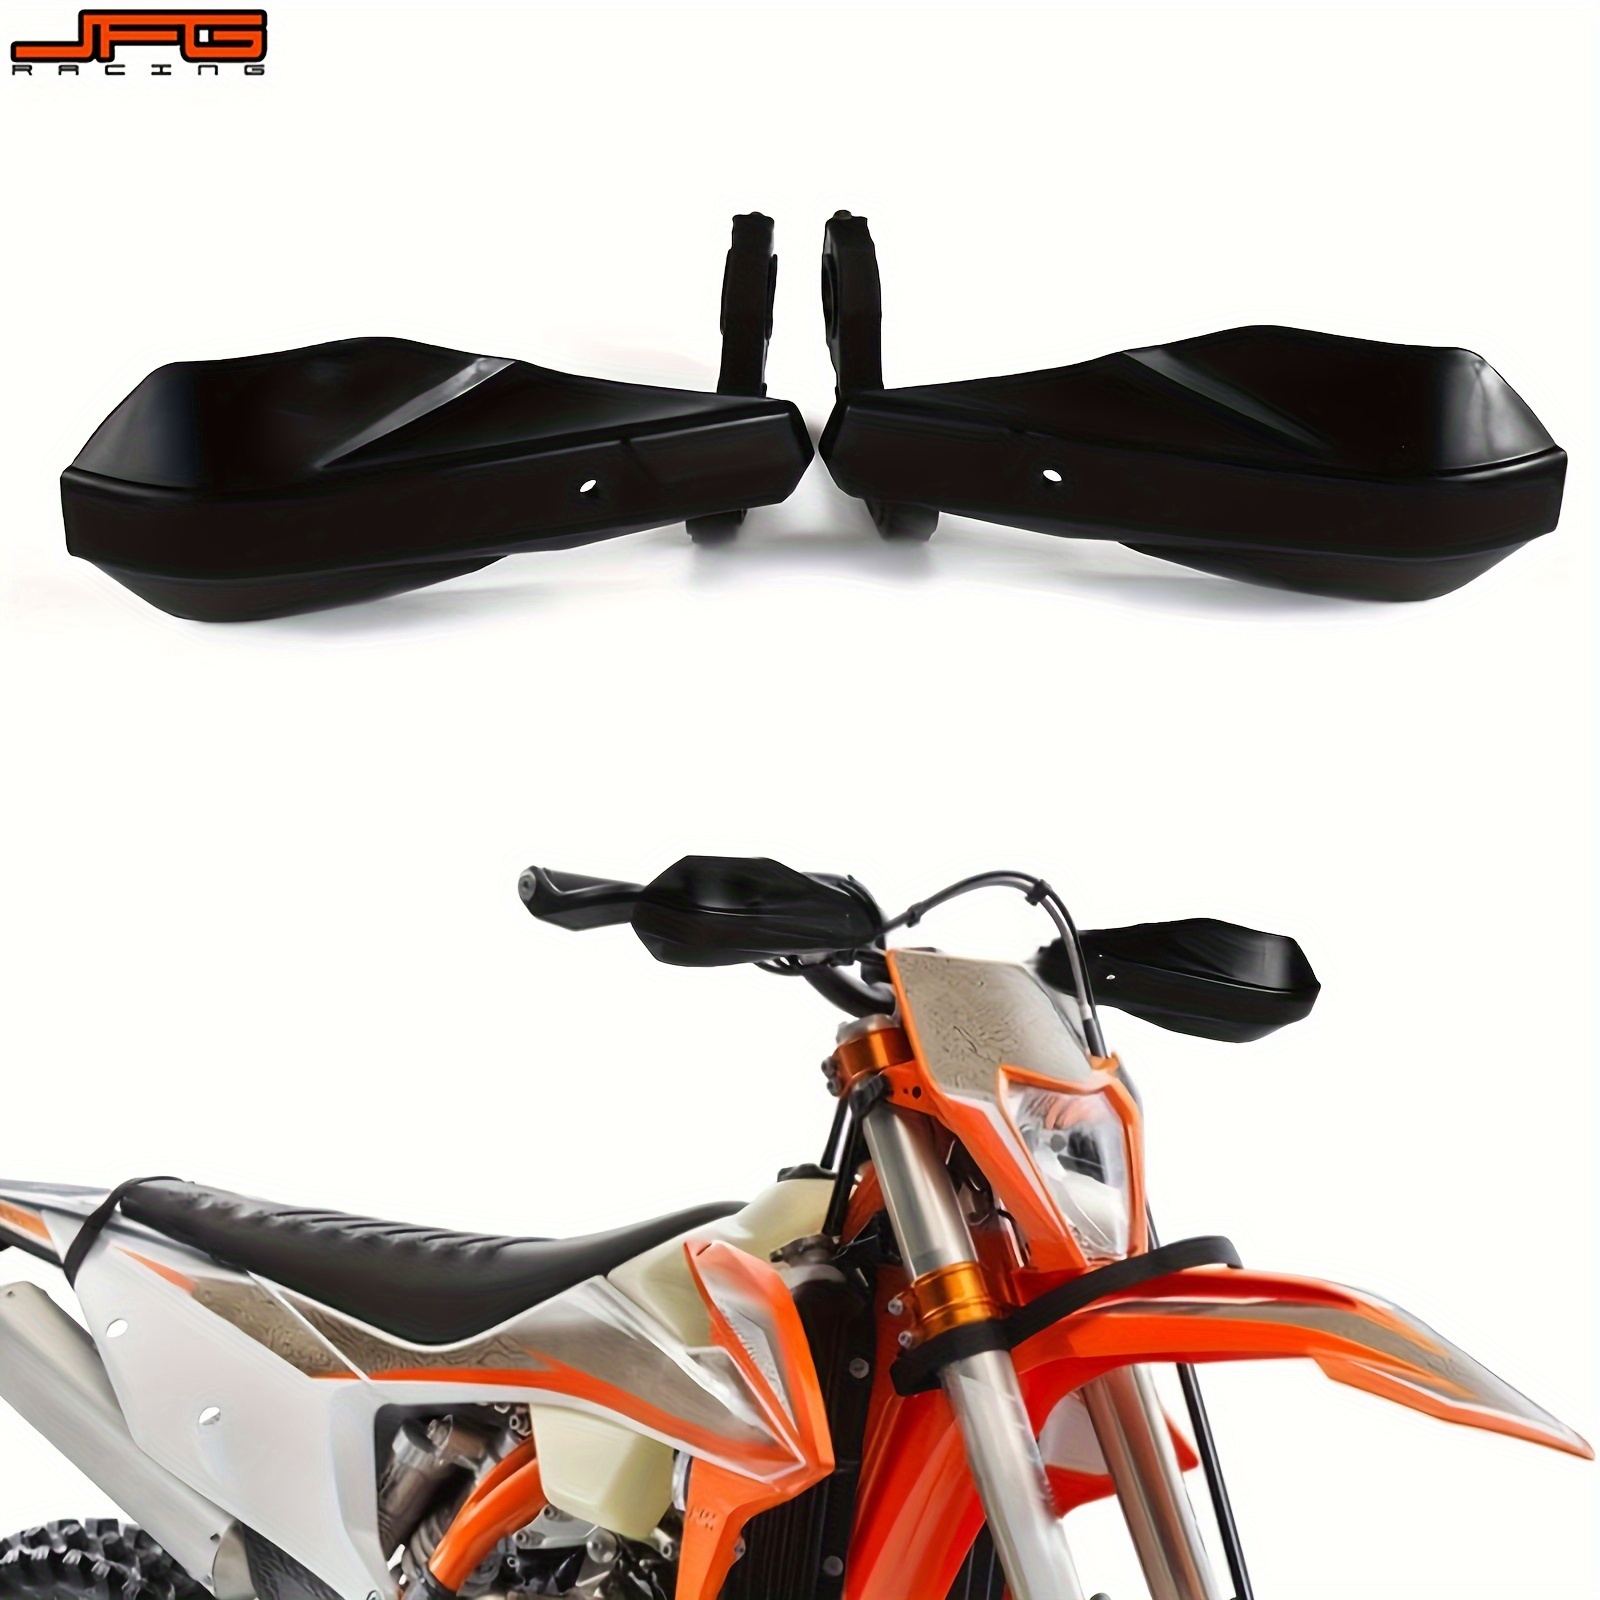 

Universal Handguards Hand Brush Guards Protector For Off Road Atv Motorcycle Pit Dirt Bike Black